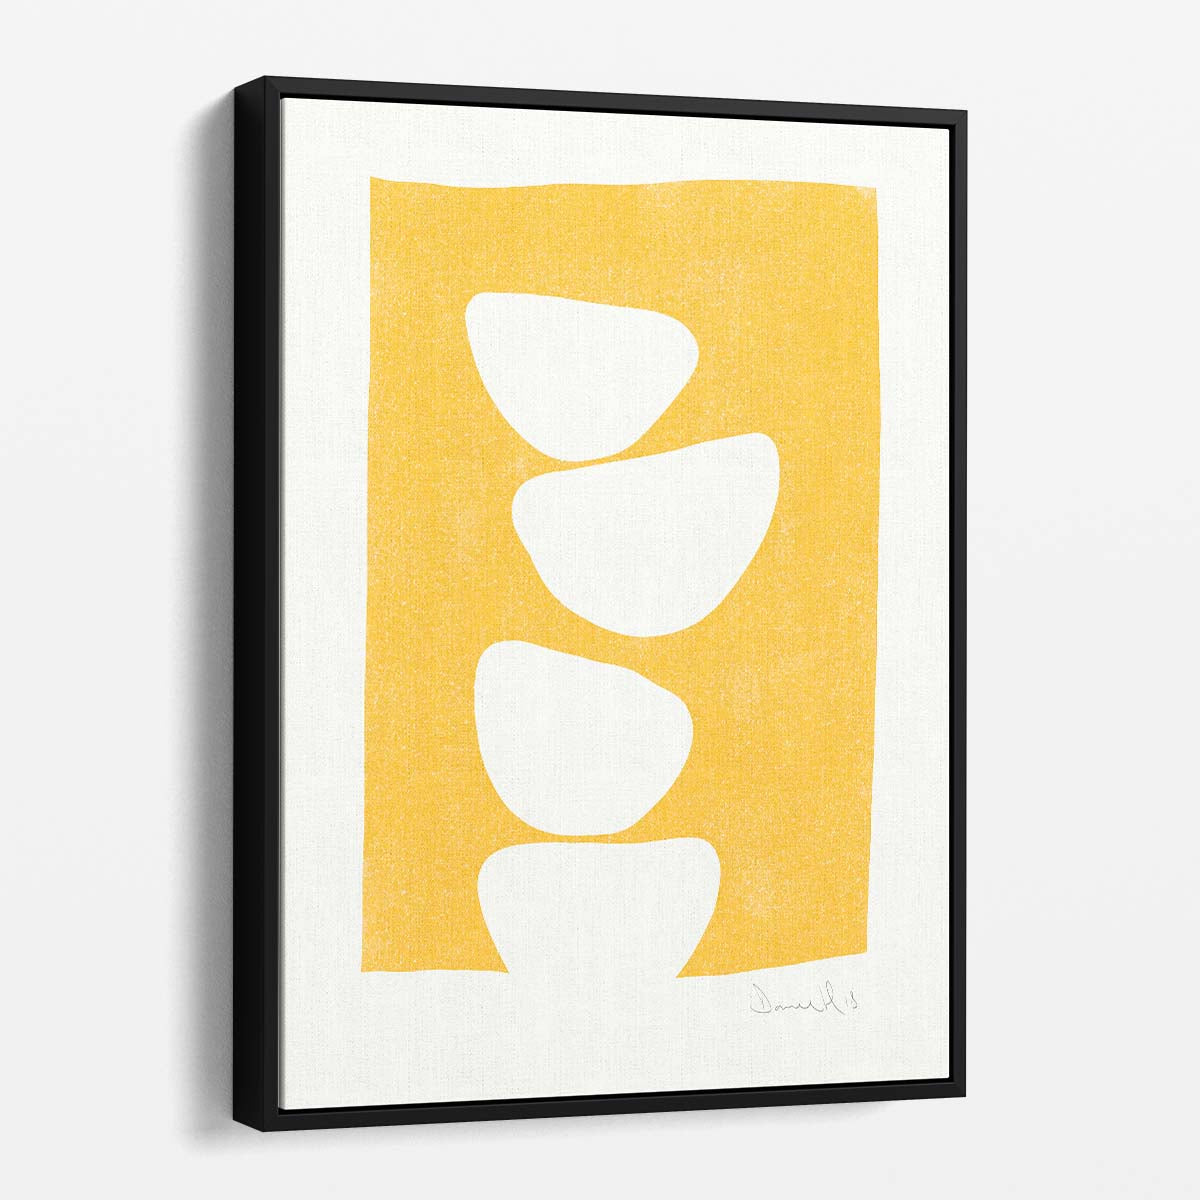 Dan Hobday's Modern Abstract Yellow Geometric Illustration, Mellow No2 by Luxuriance Designs, made in USA